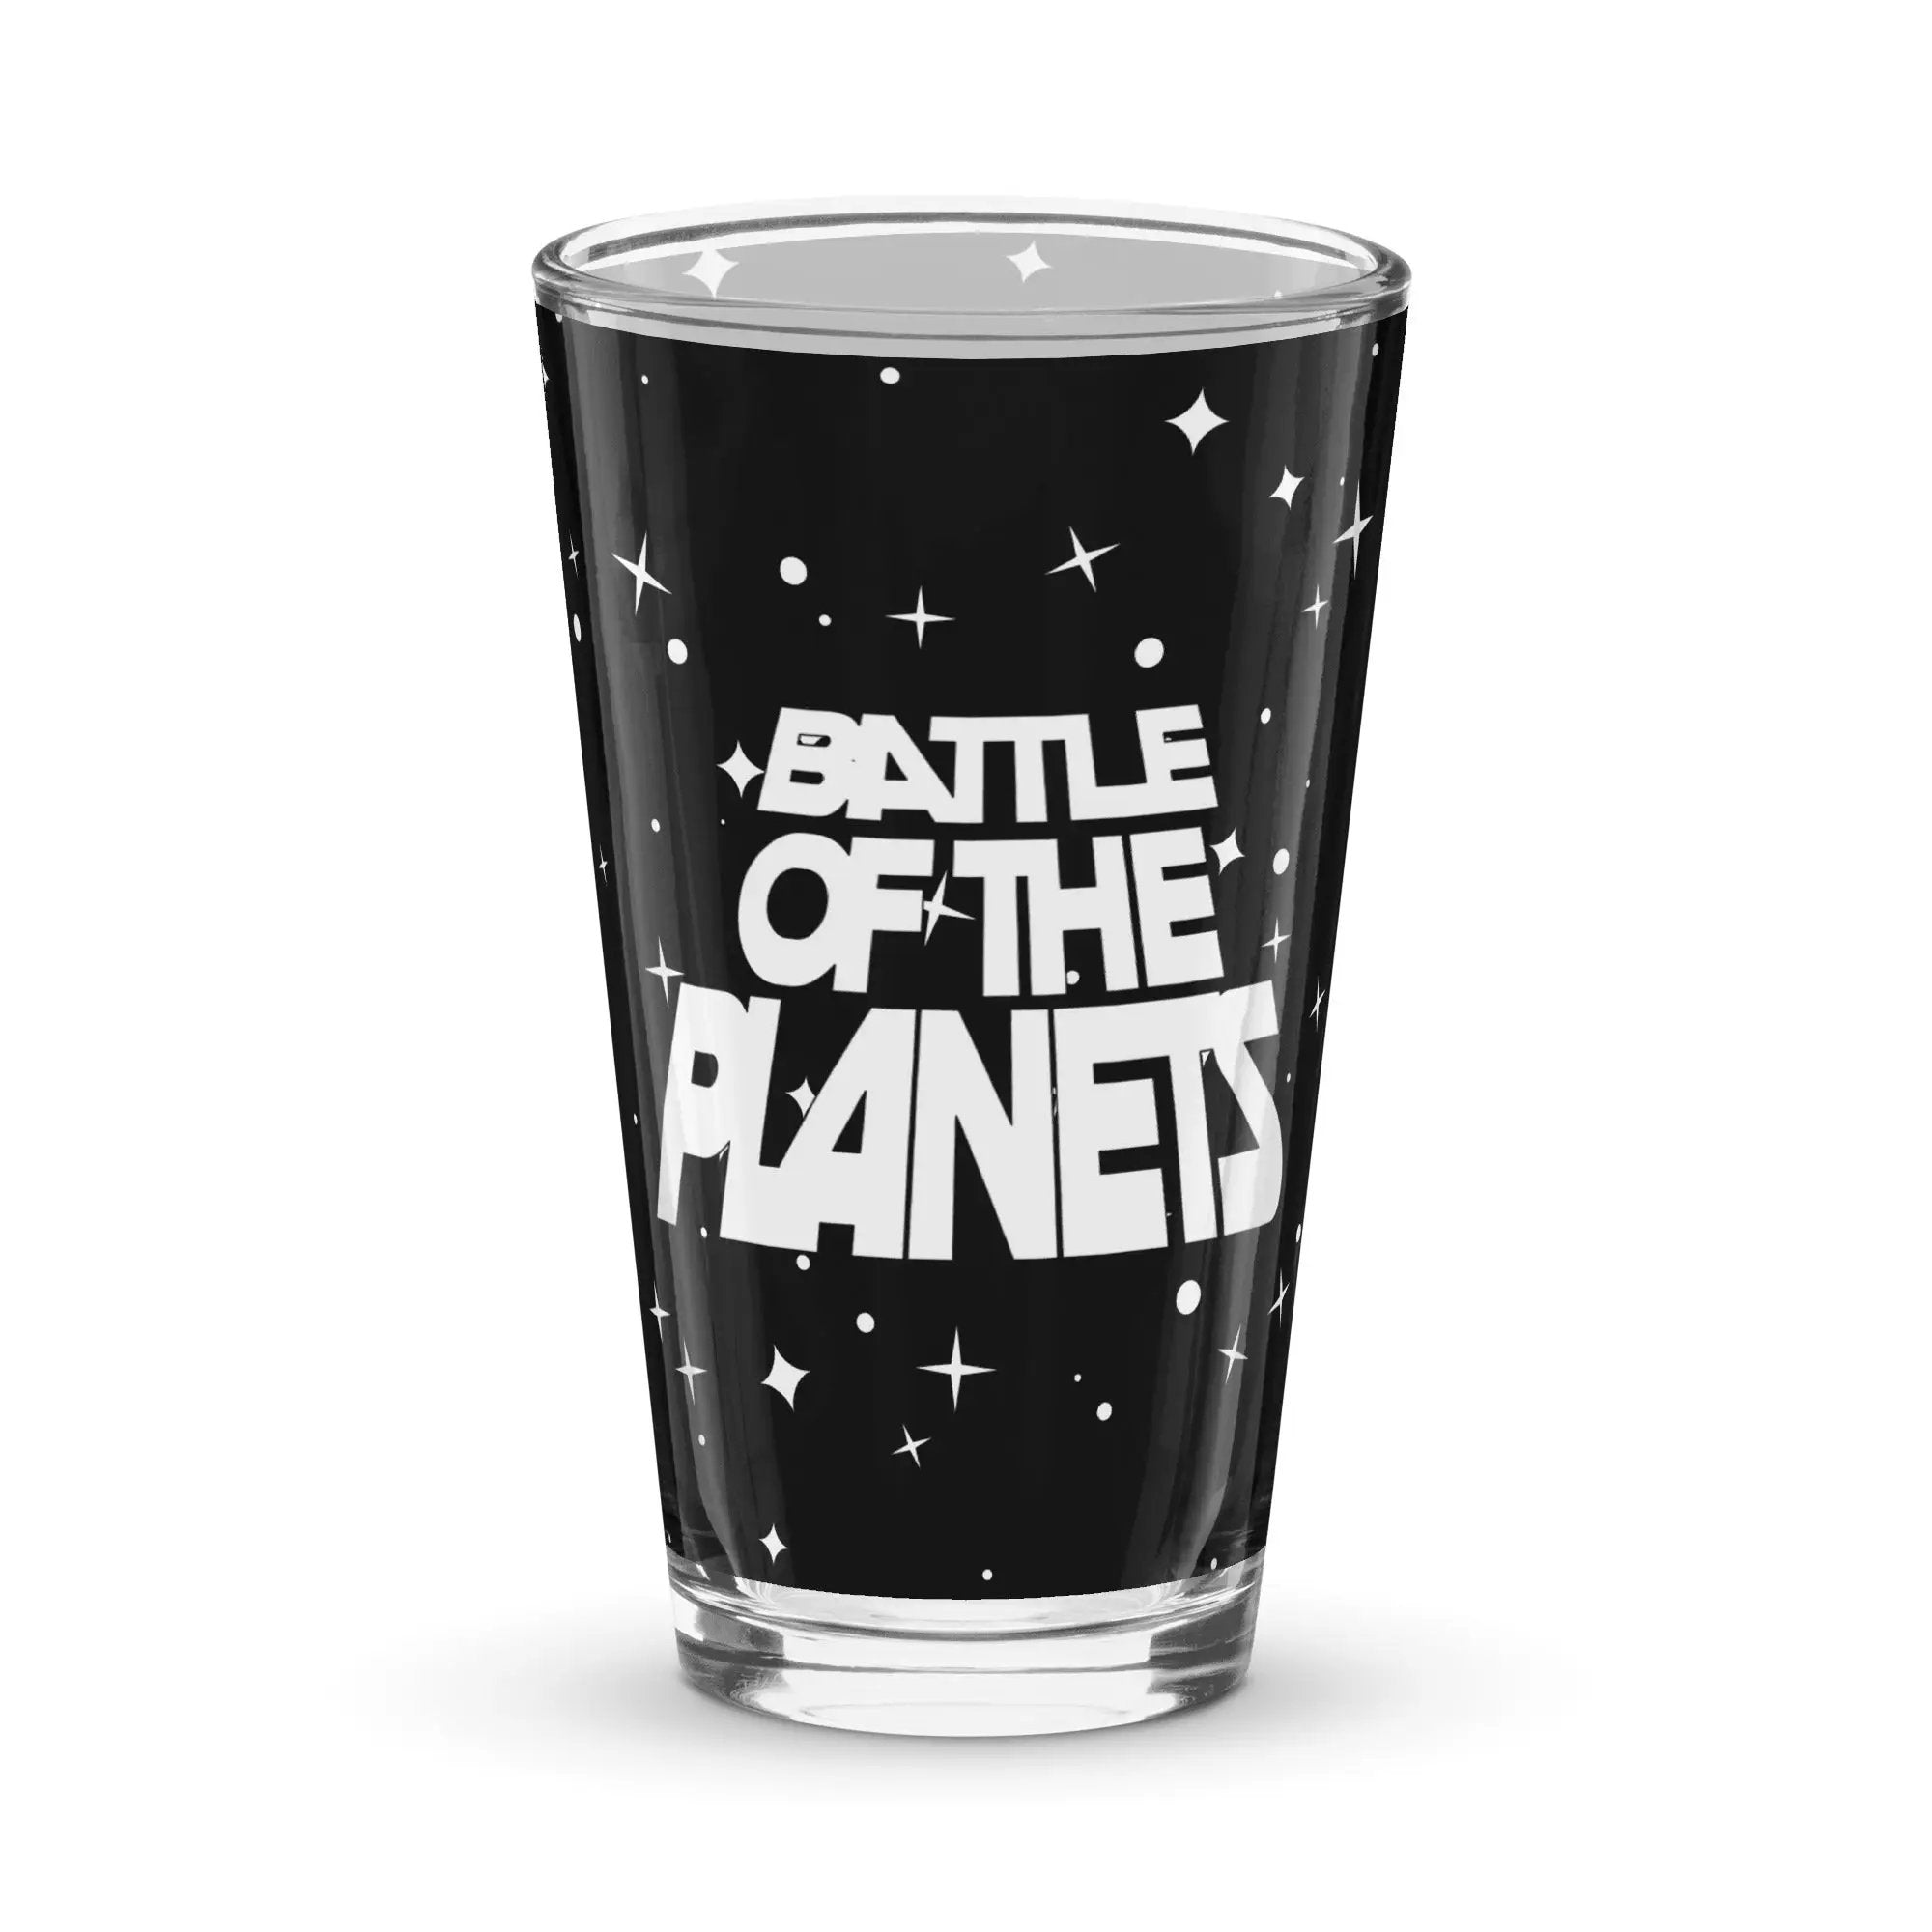 Battle Of The Planets Shaker pint glass